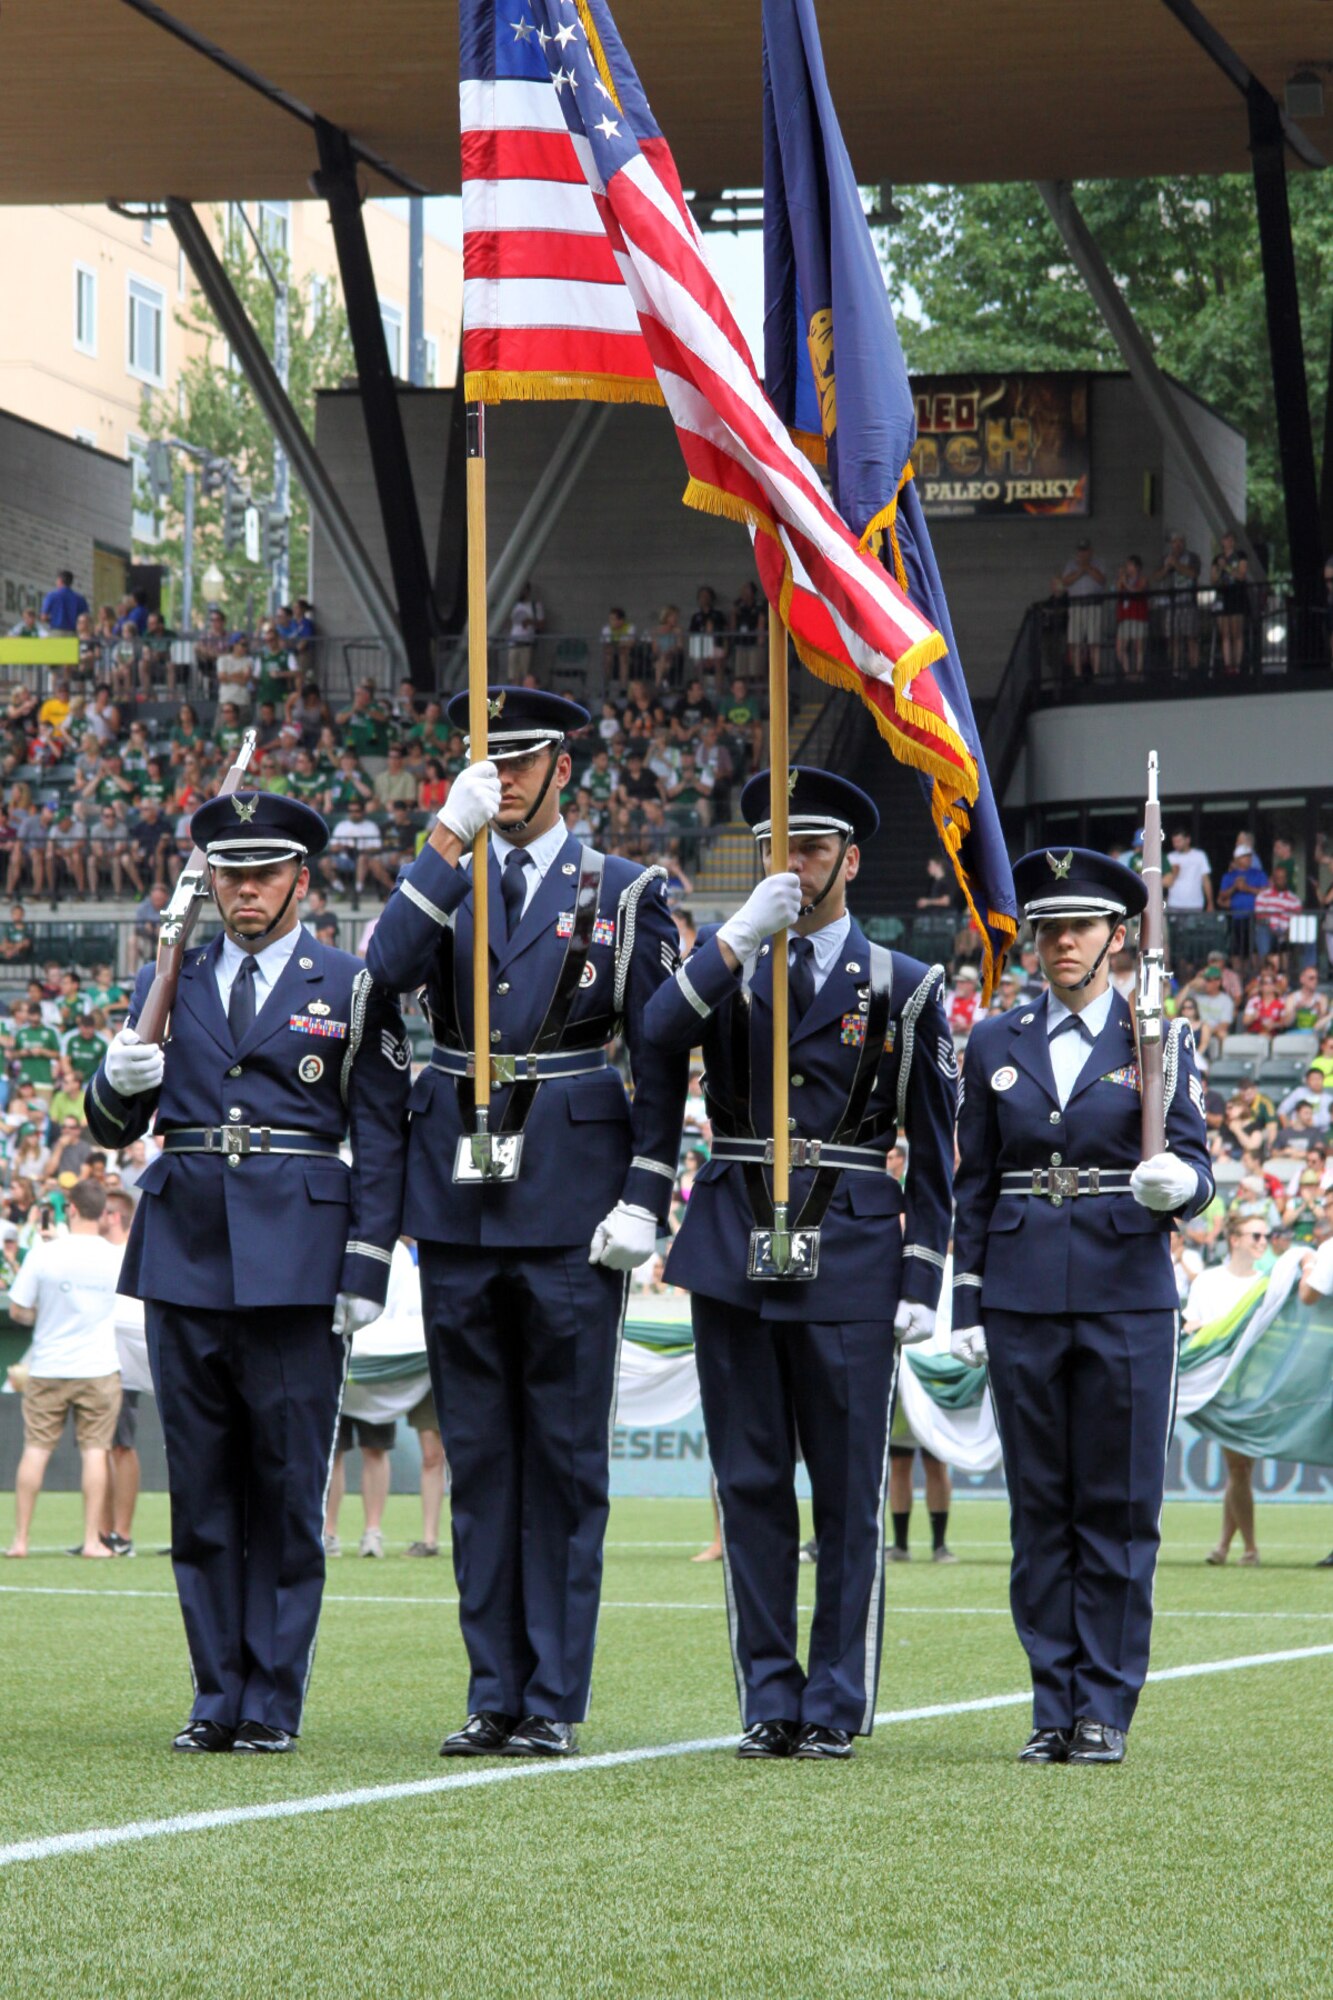 Members of the Portland Air National Guard Base Honor Guard team, from left to right, Staff Sgt. Joseph Regas, Staff Sgt. Bret Workman, Tech. Sgt. John Hughel, and Staff Sgt. Kalene Kaplan Present the Colors at the Portland Timbers soccer match against the Seattle Sounders held at Providence Park, Portland, Ore., June 28, 2015. (U.S. Air National Guard photo by Master Sgt. Shelly Davison, 142nd Fighter Wing Public Affairs/Released)